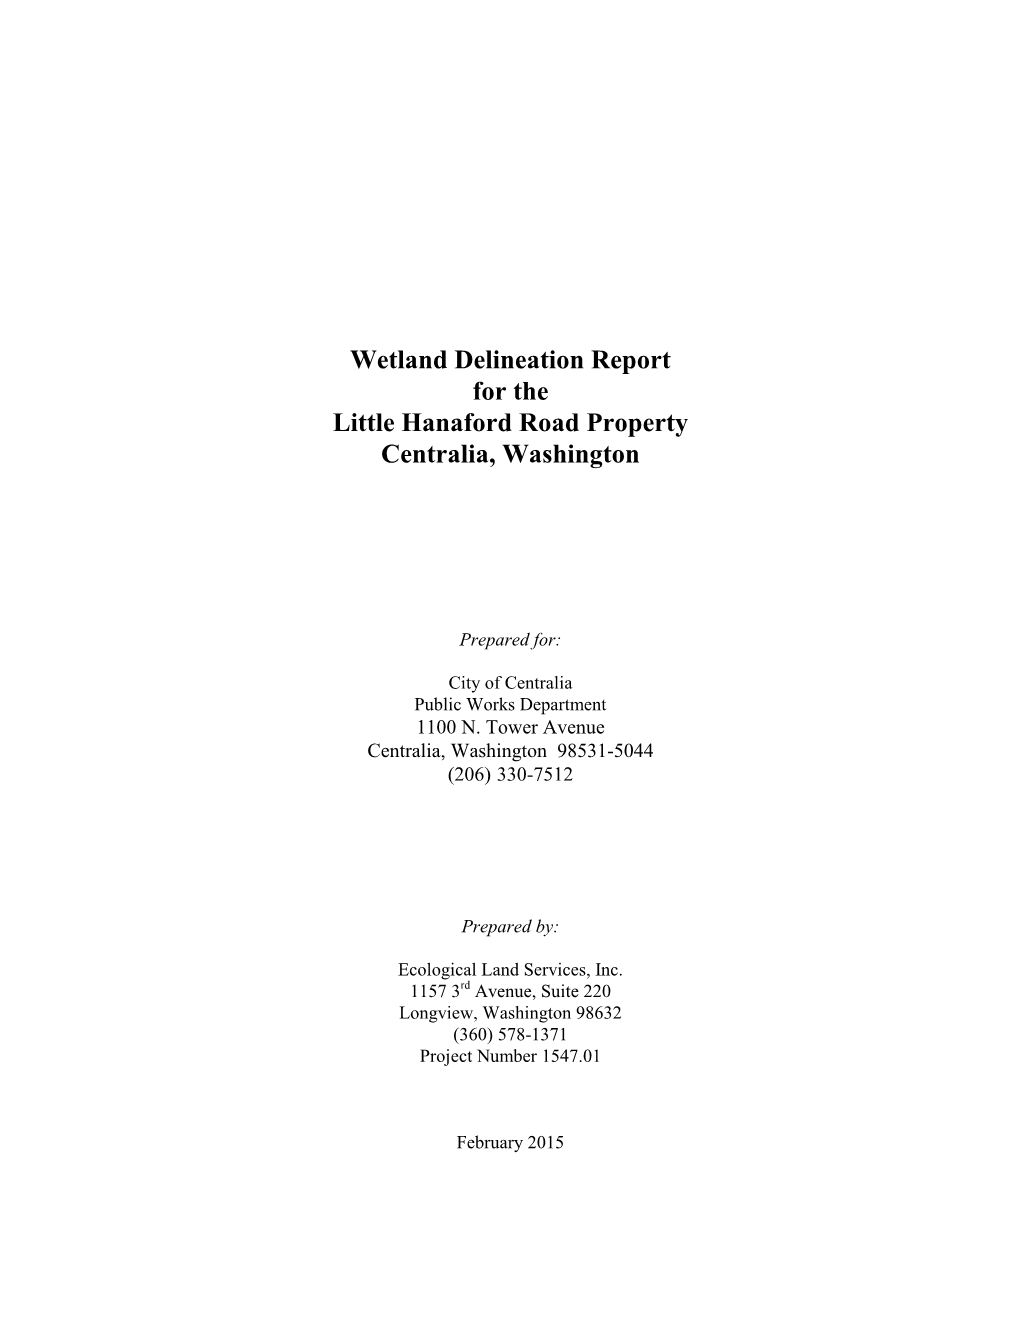 Wetland Delineation Report for the Little Hanaford Road Property Centralia, Washington